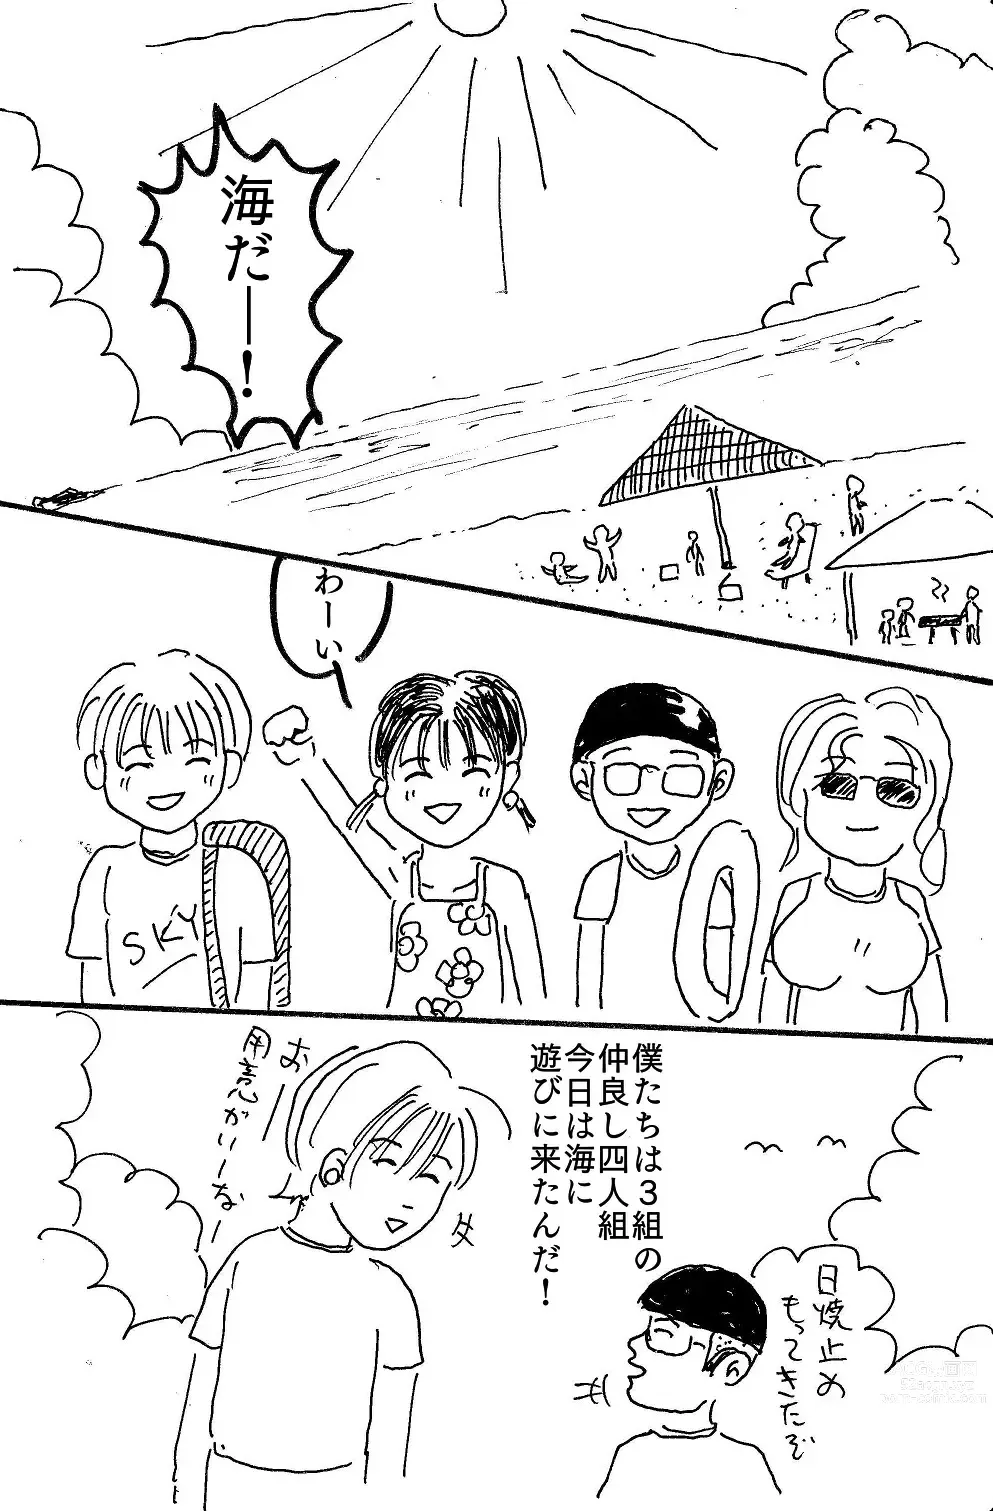 Page 2 of doujinshi 映子と太一